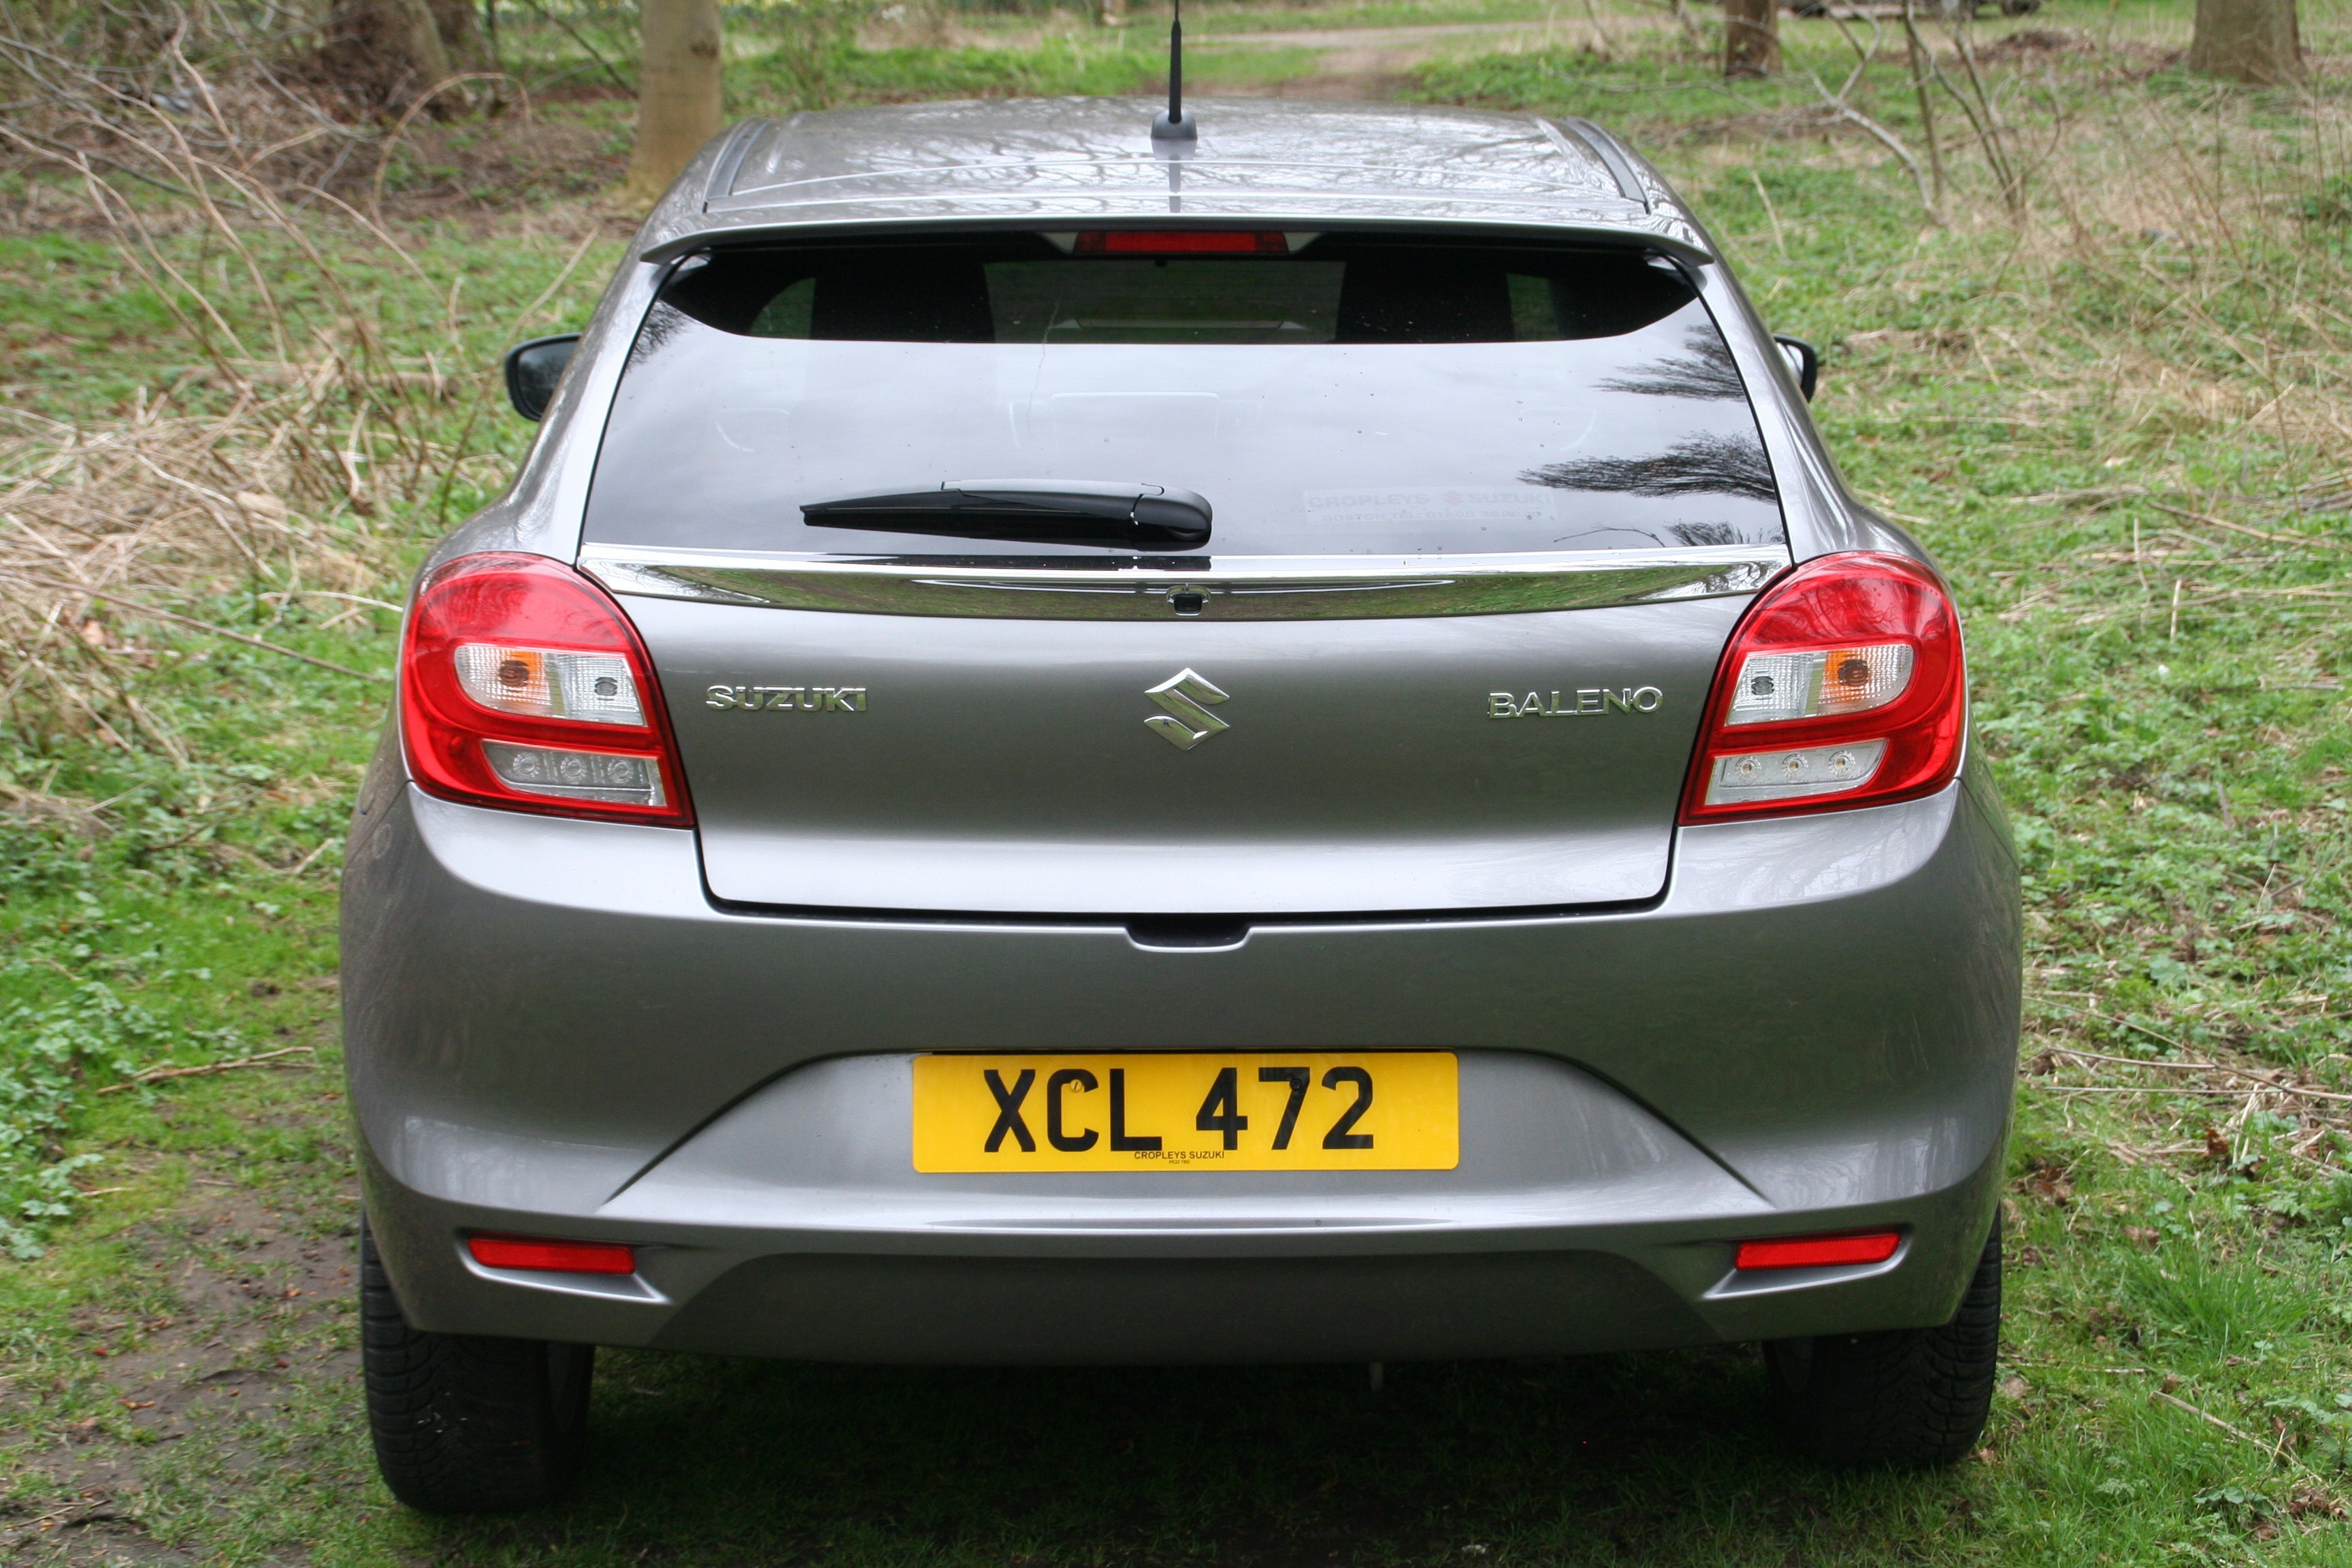 Long-term life with a Suzuki Baleno – Month 6 of 42